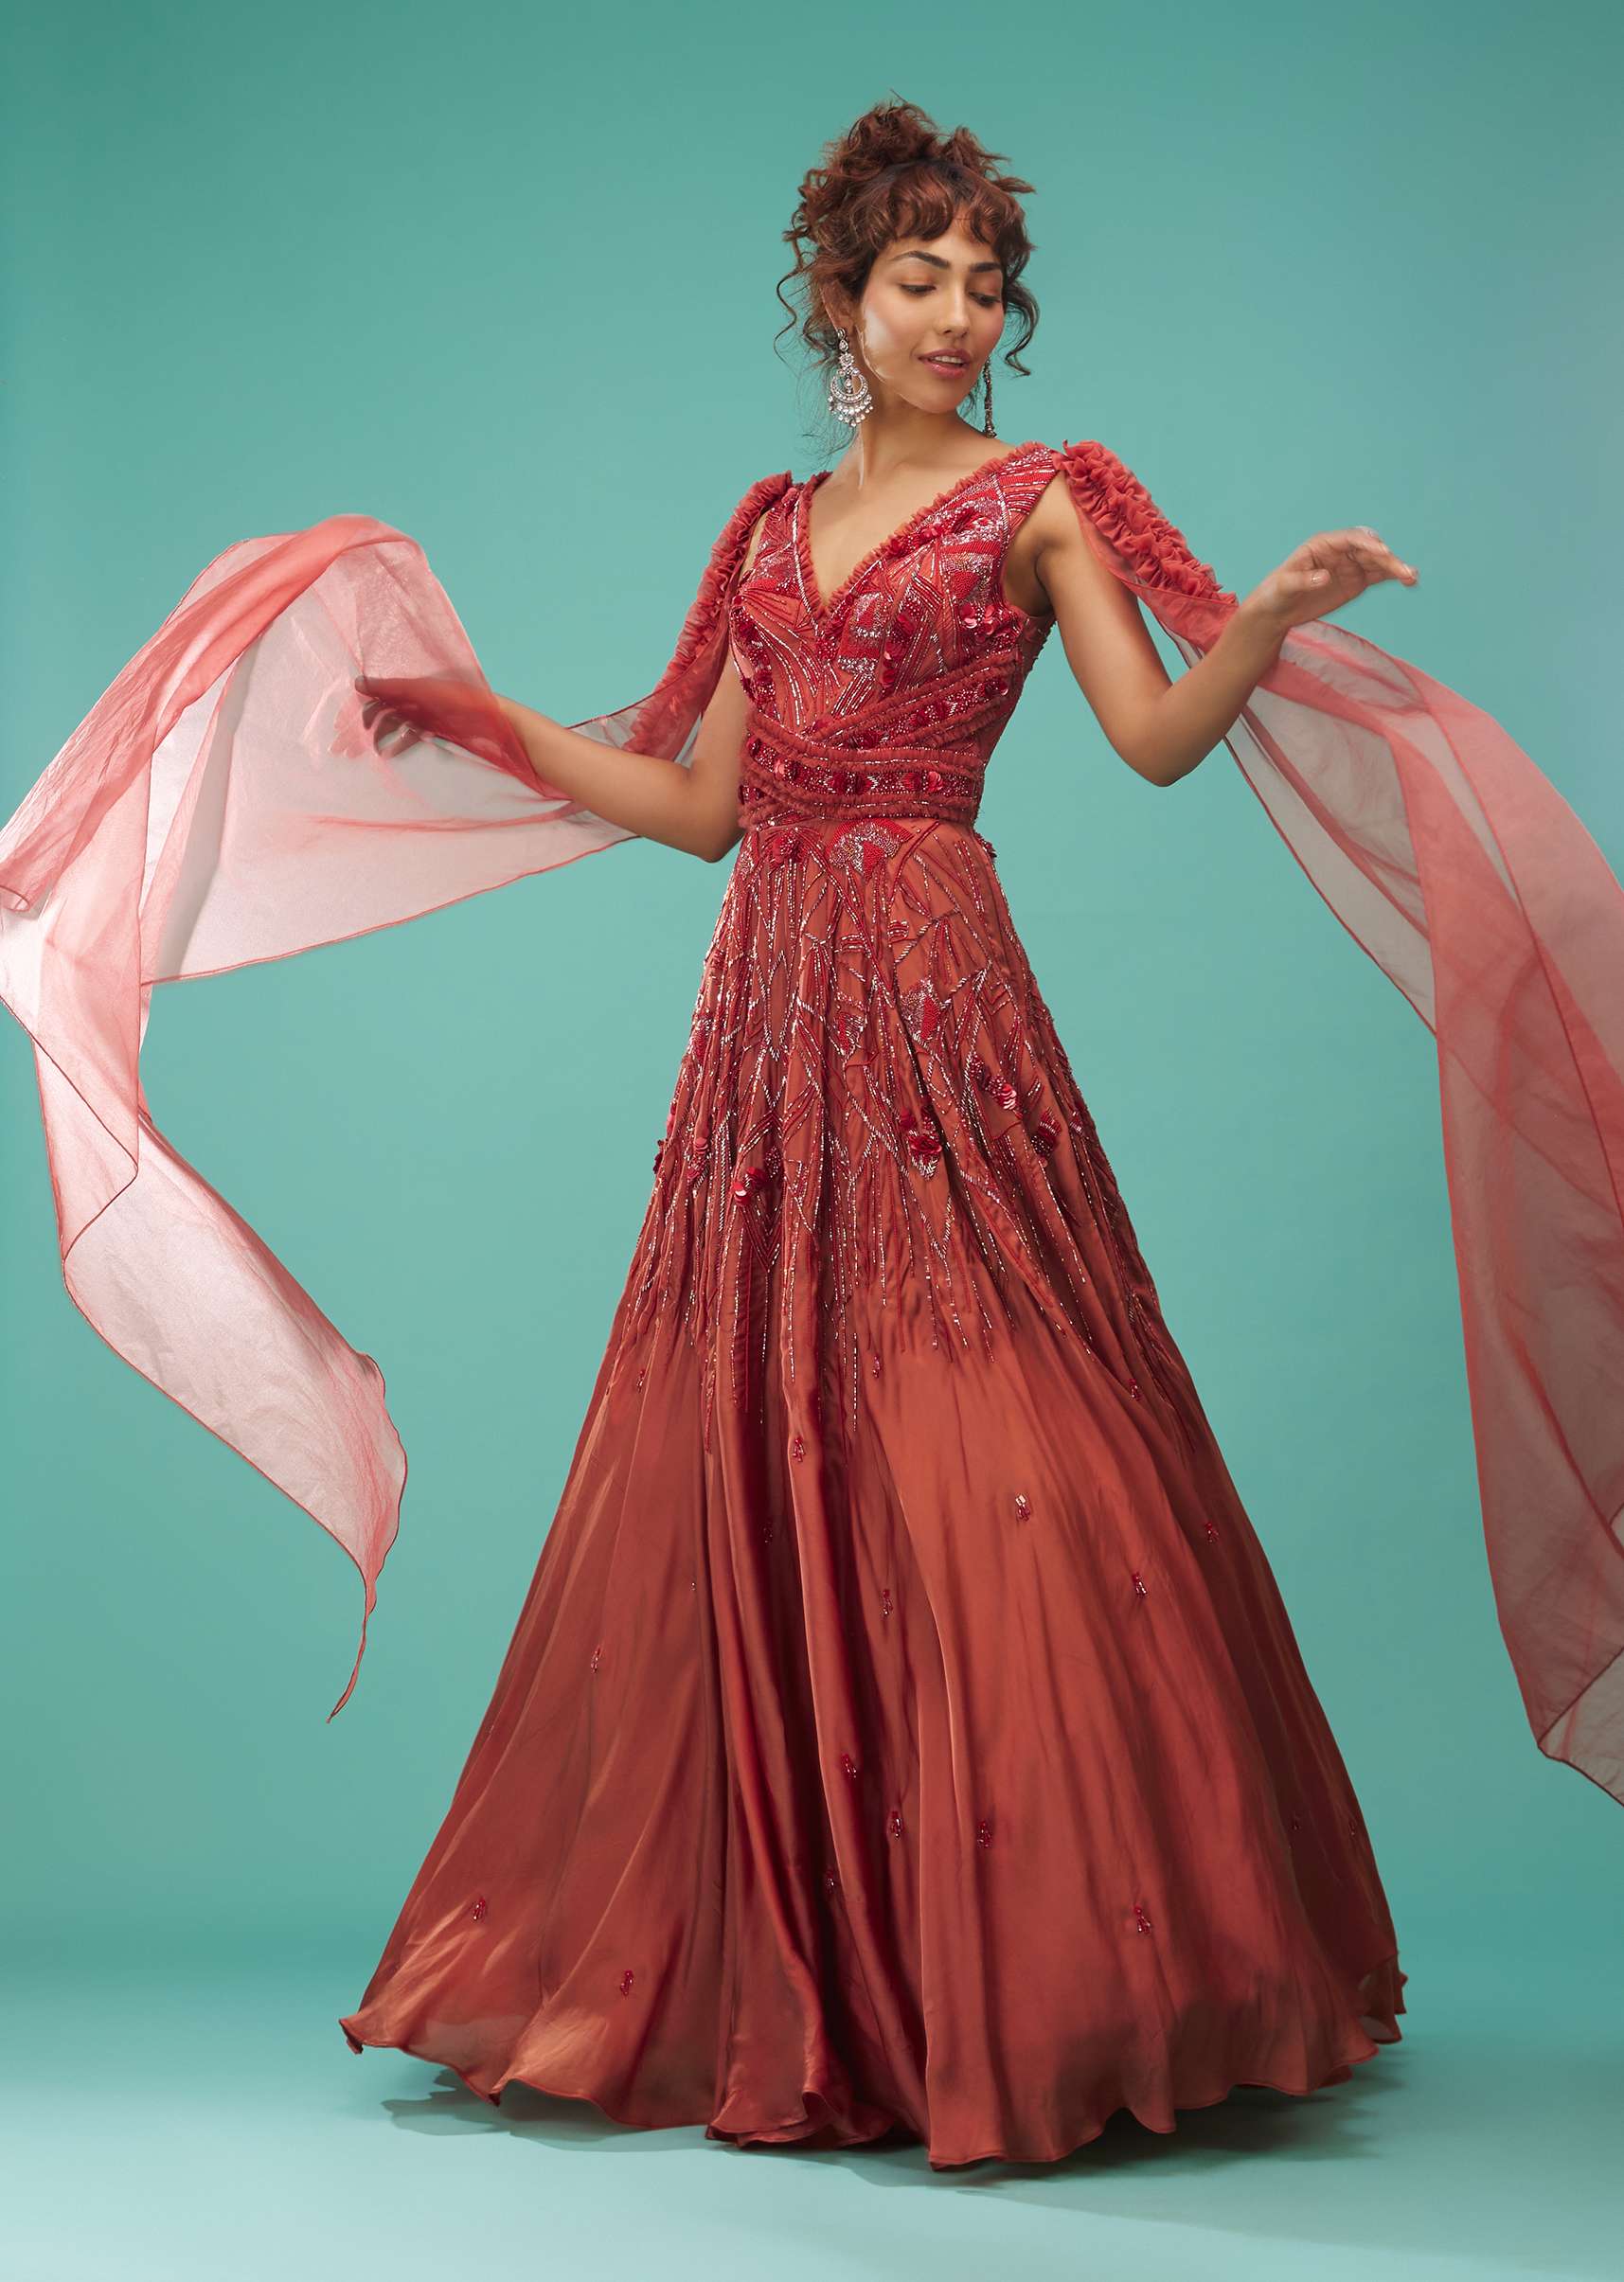 Brick Red Ball Gown With Ruffle Frills And Embroidery